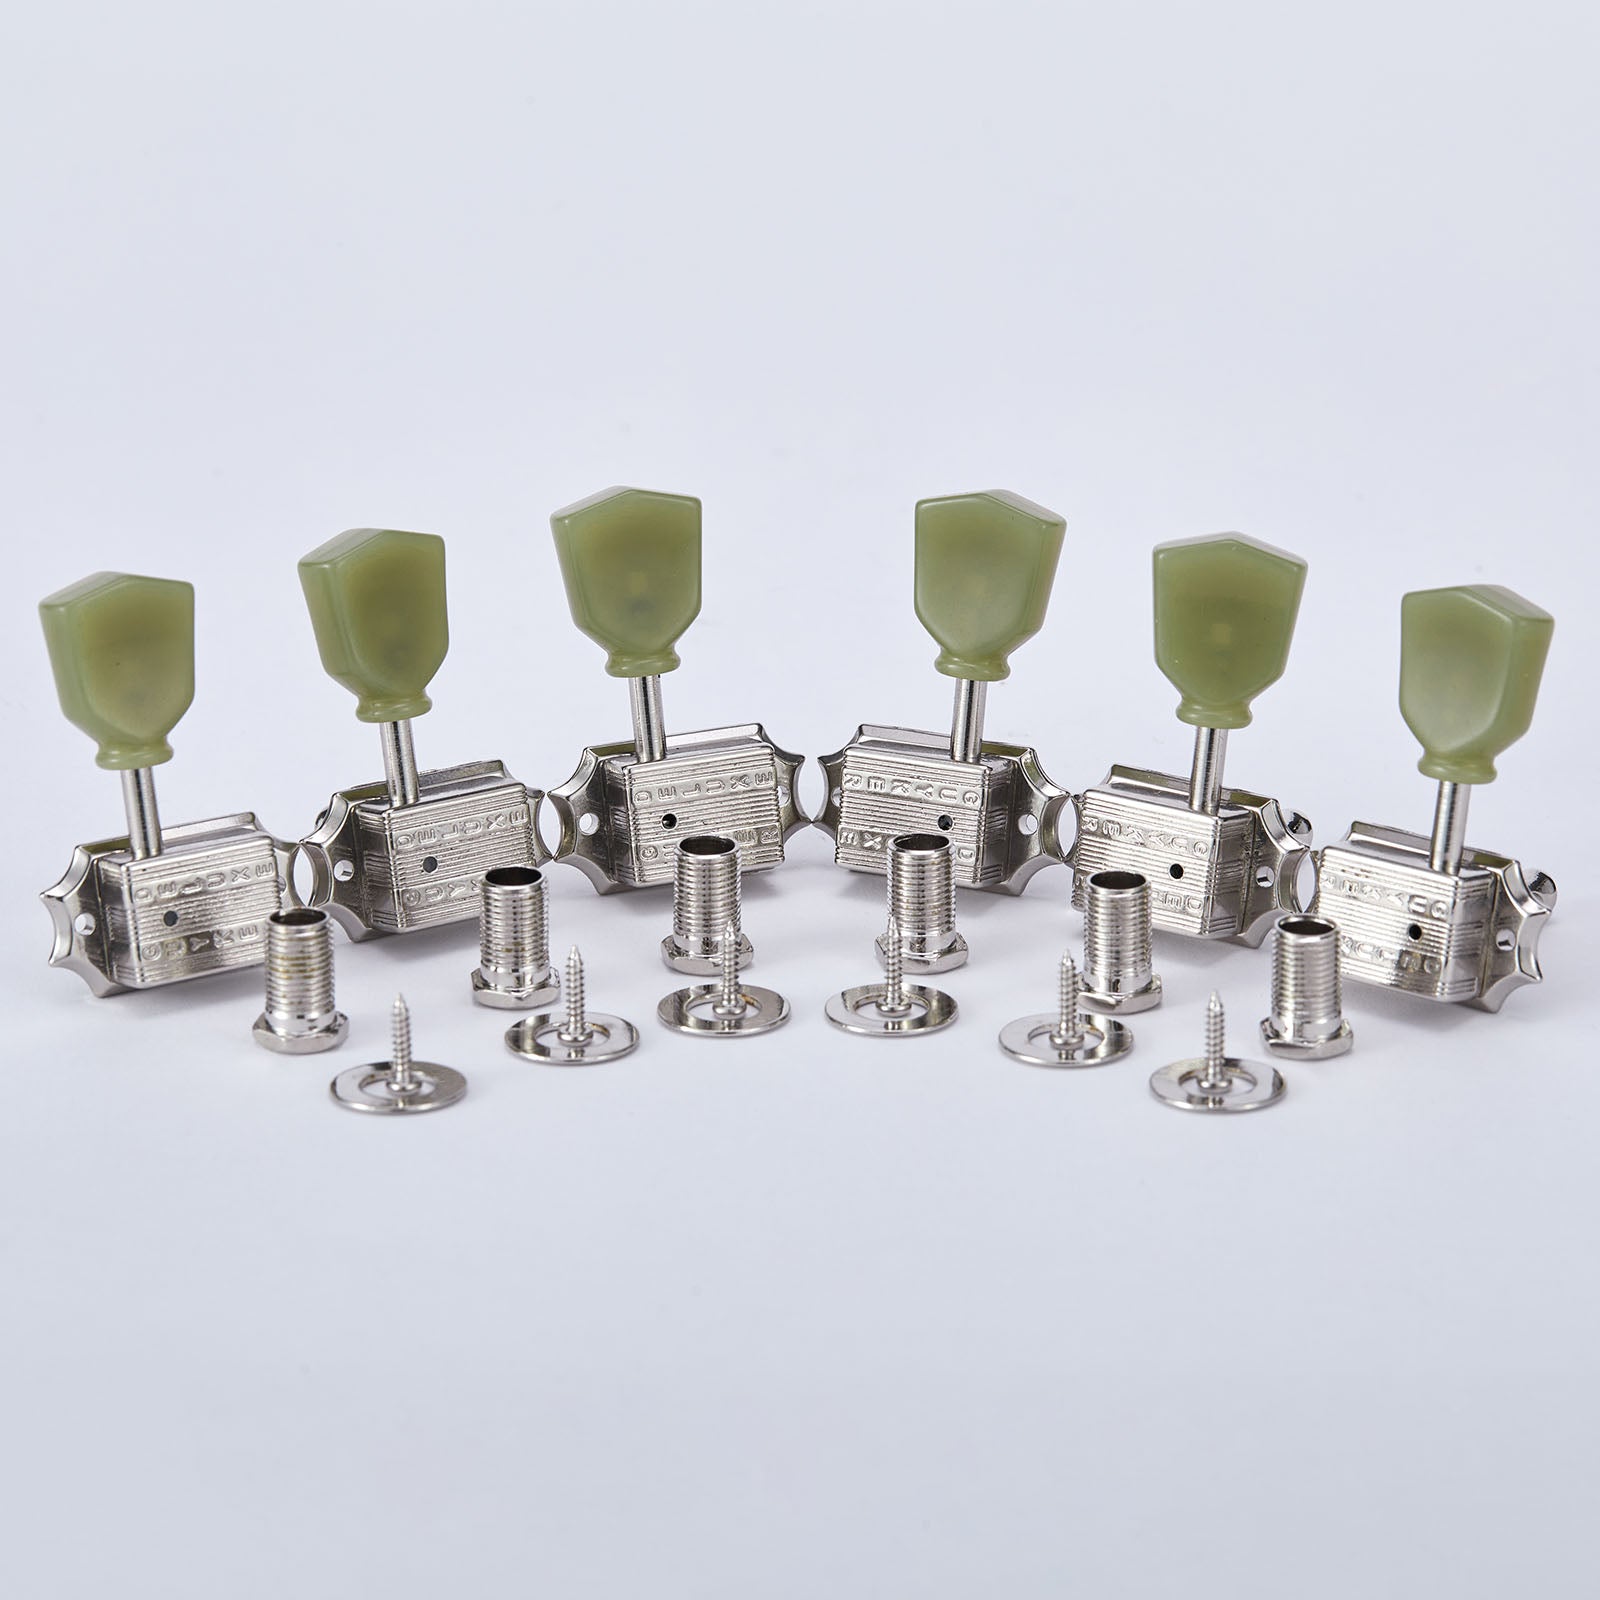 3R/3L Vintage Style Guitar Tuning Pegs Machines